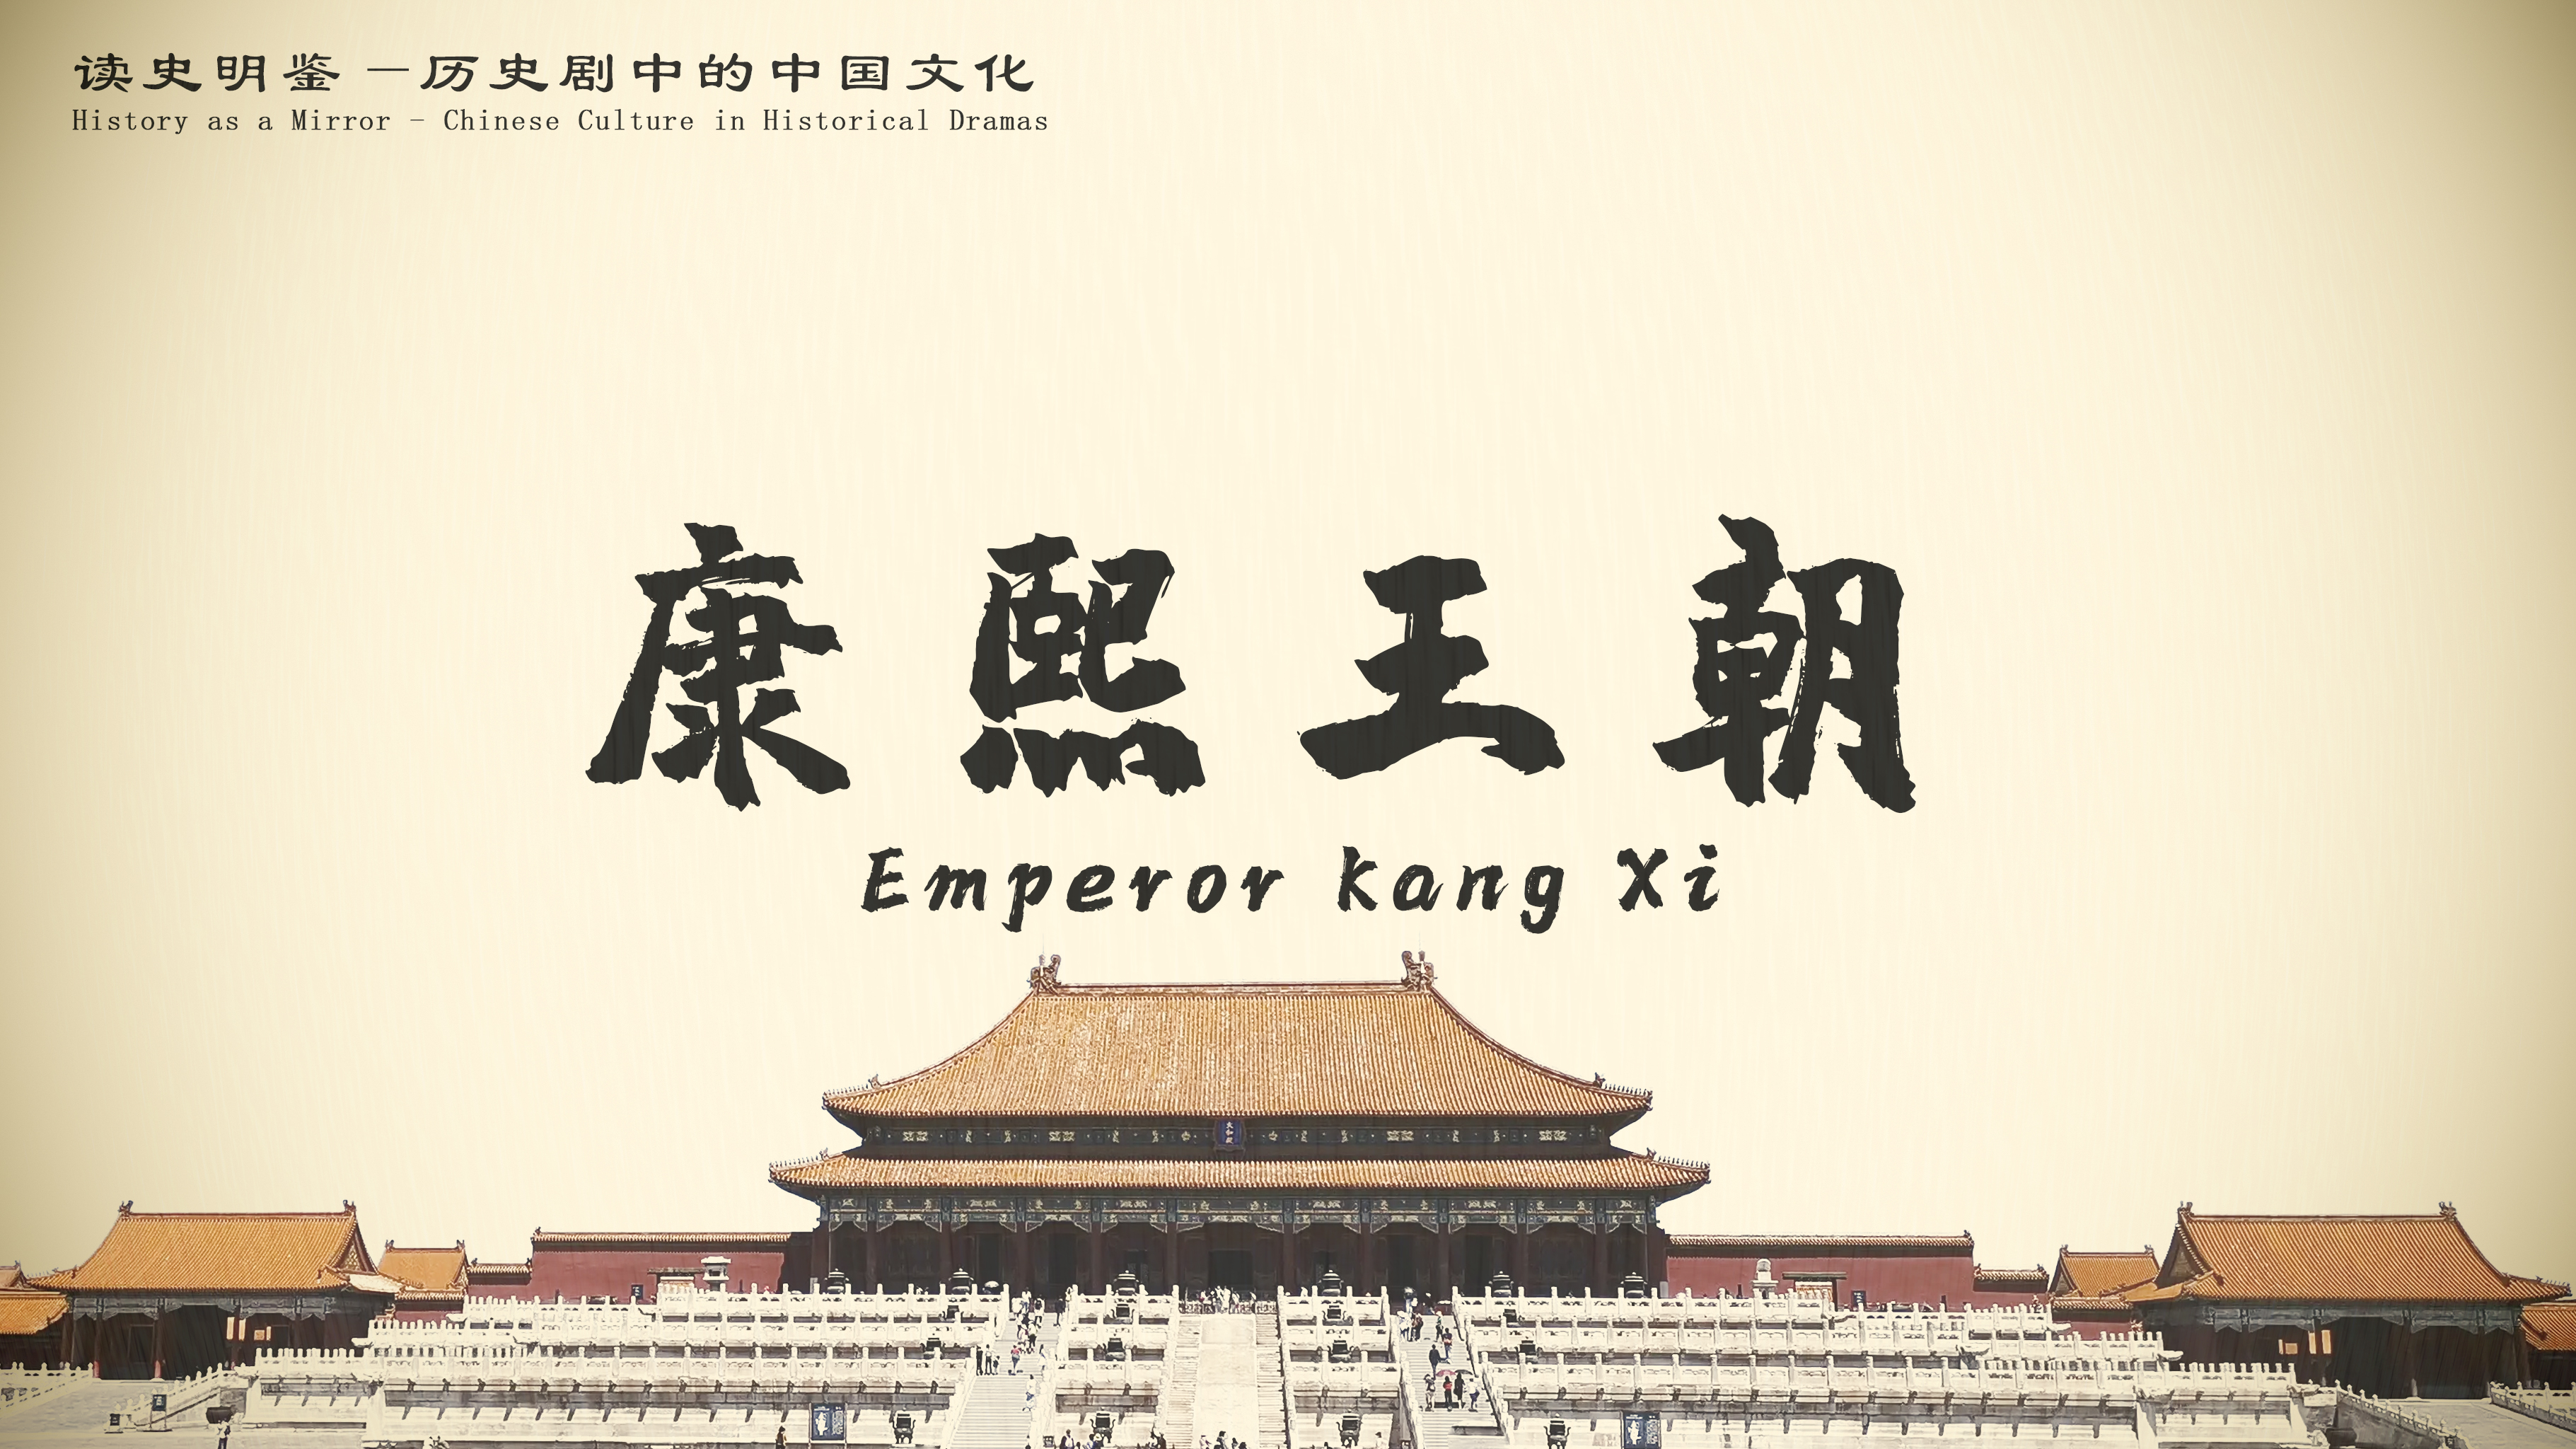 History as a Mirror - Chinese Culture in Historical Dramas: Explanation of relevant cultural contents of Emperor Kang Xi